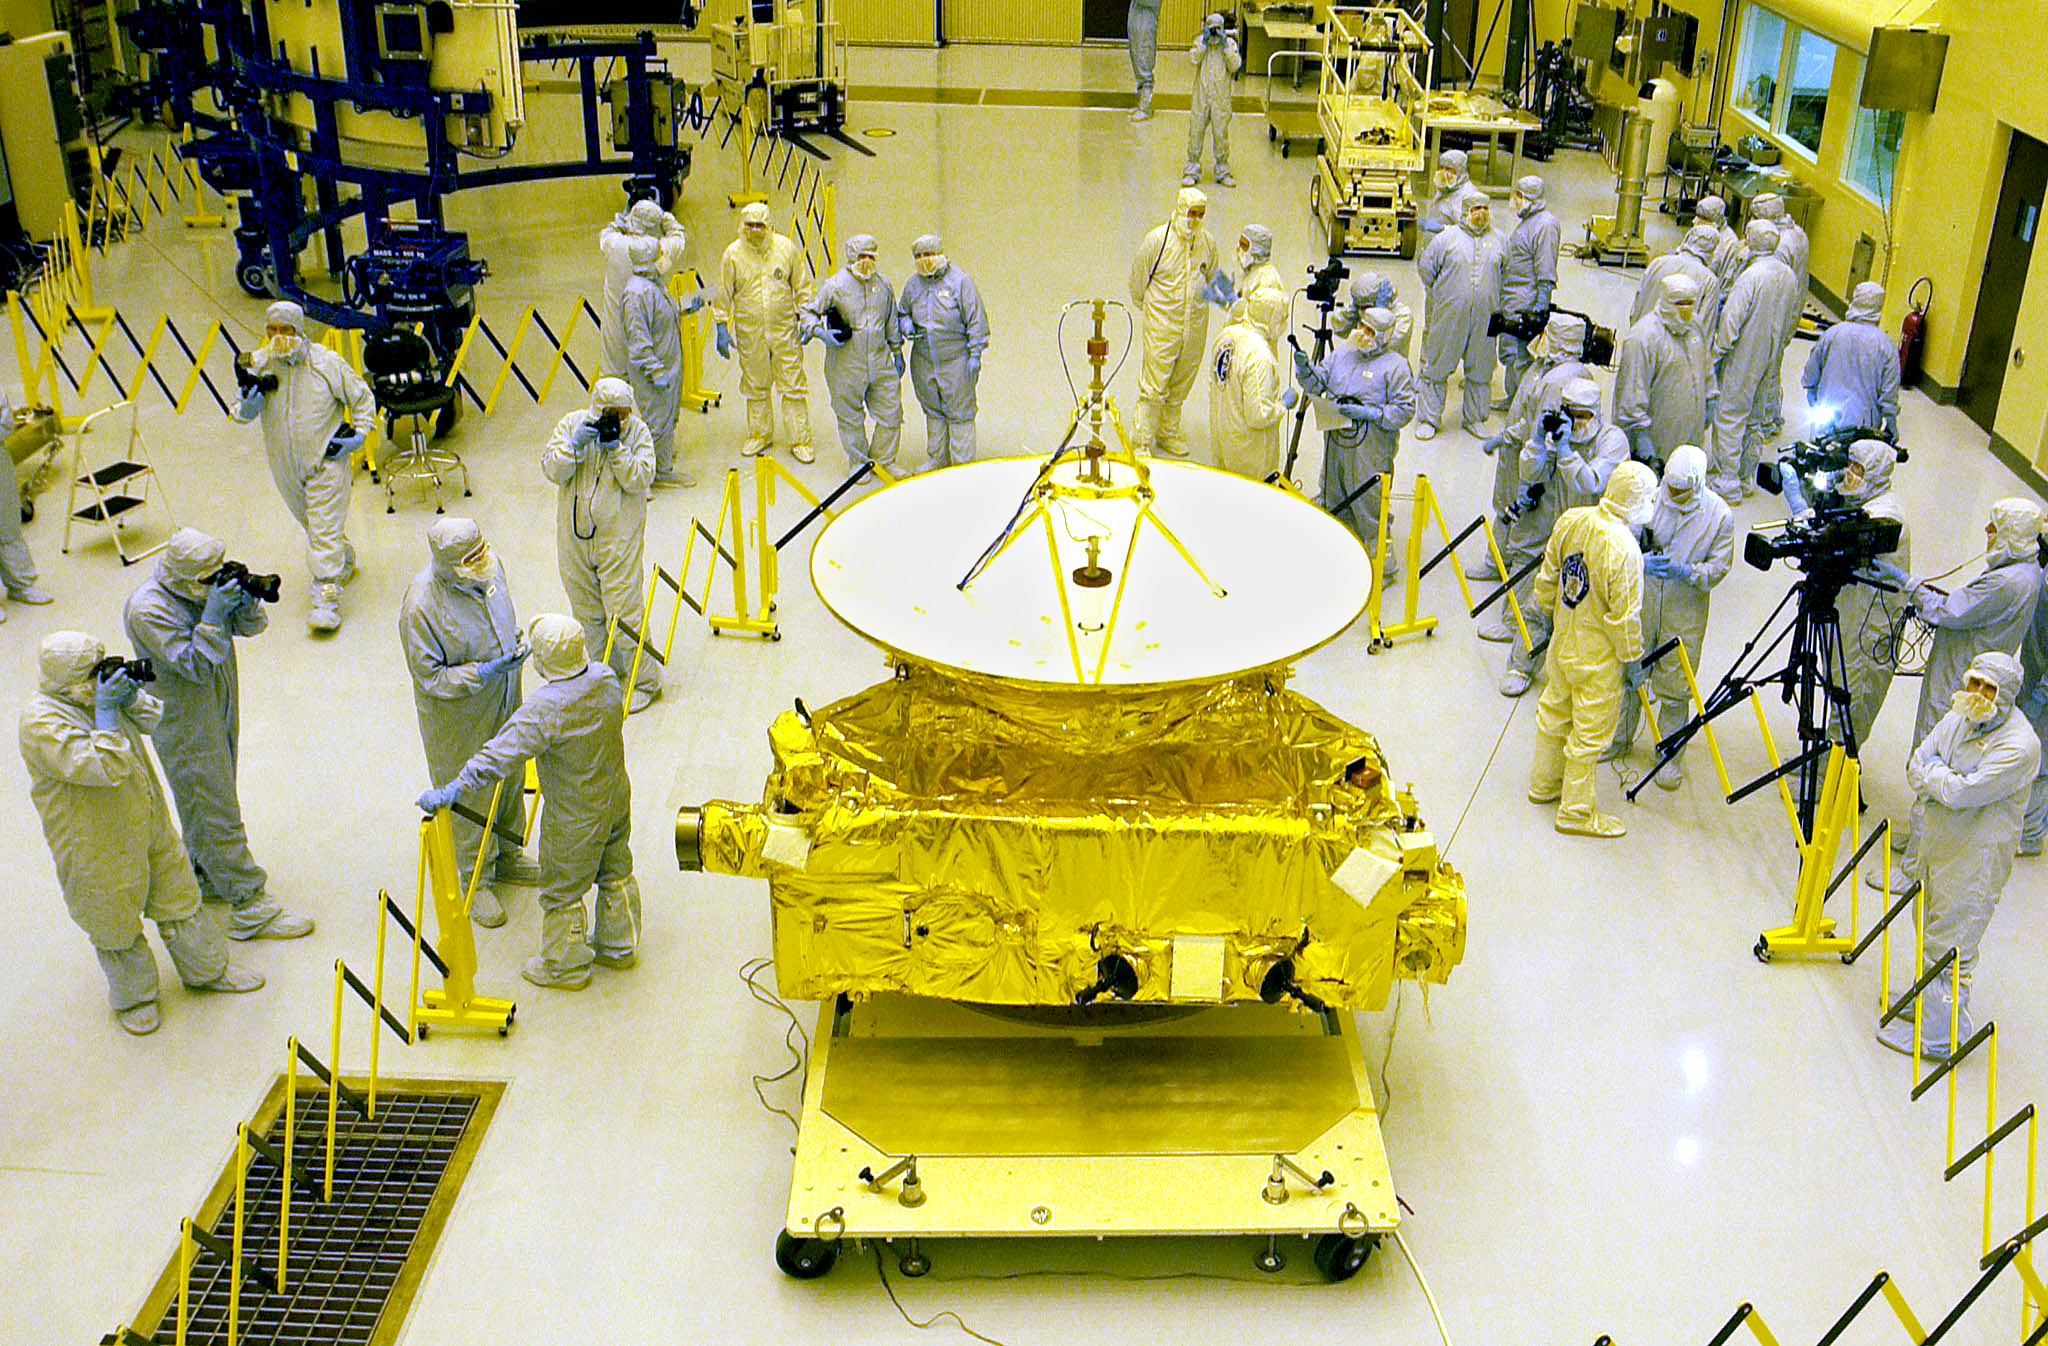 PHOTO: Members of the media garbed in protective uniforms view NASA's New Horizons spacecraft on Nov. 4, 2005 at Kennedy Space Center in Florida.